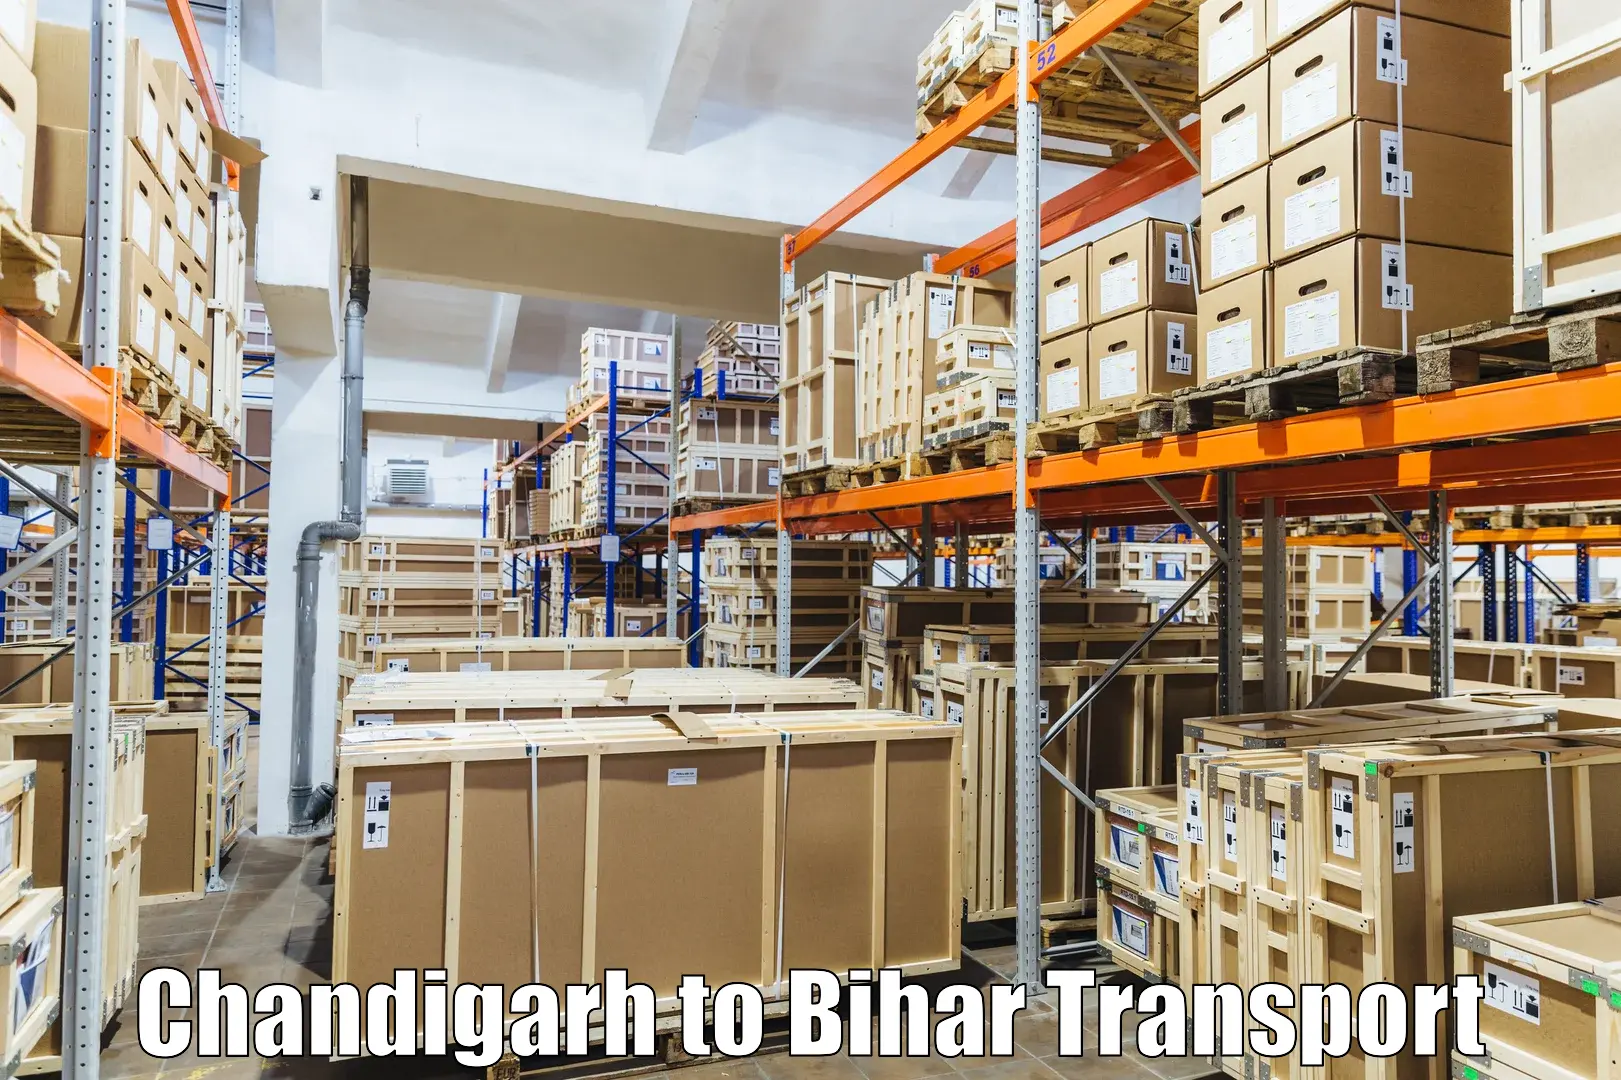 Part load transport service in India Chandigarh to Kochas